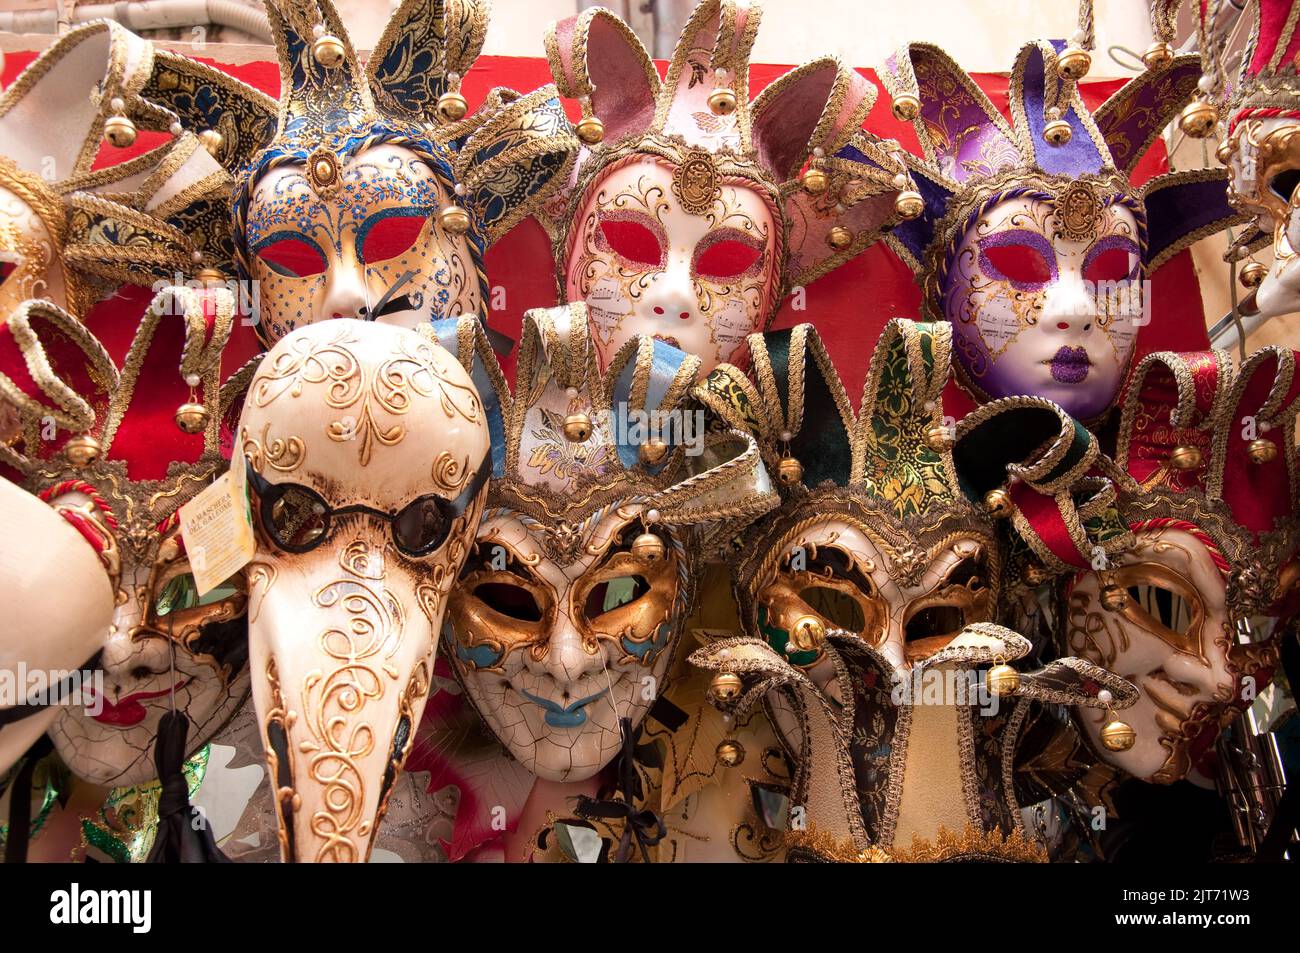 Carnival Masks, Venice, Italy.  Each year before Lent begins, there is a famous Carneval which lasts several days when masks such as these are worn by Stock Photo